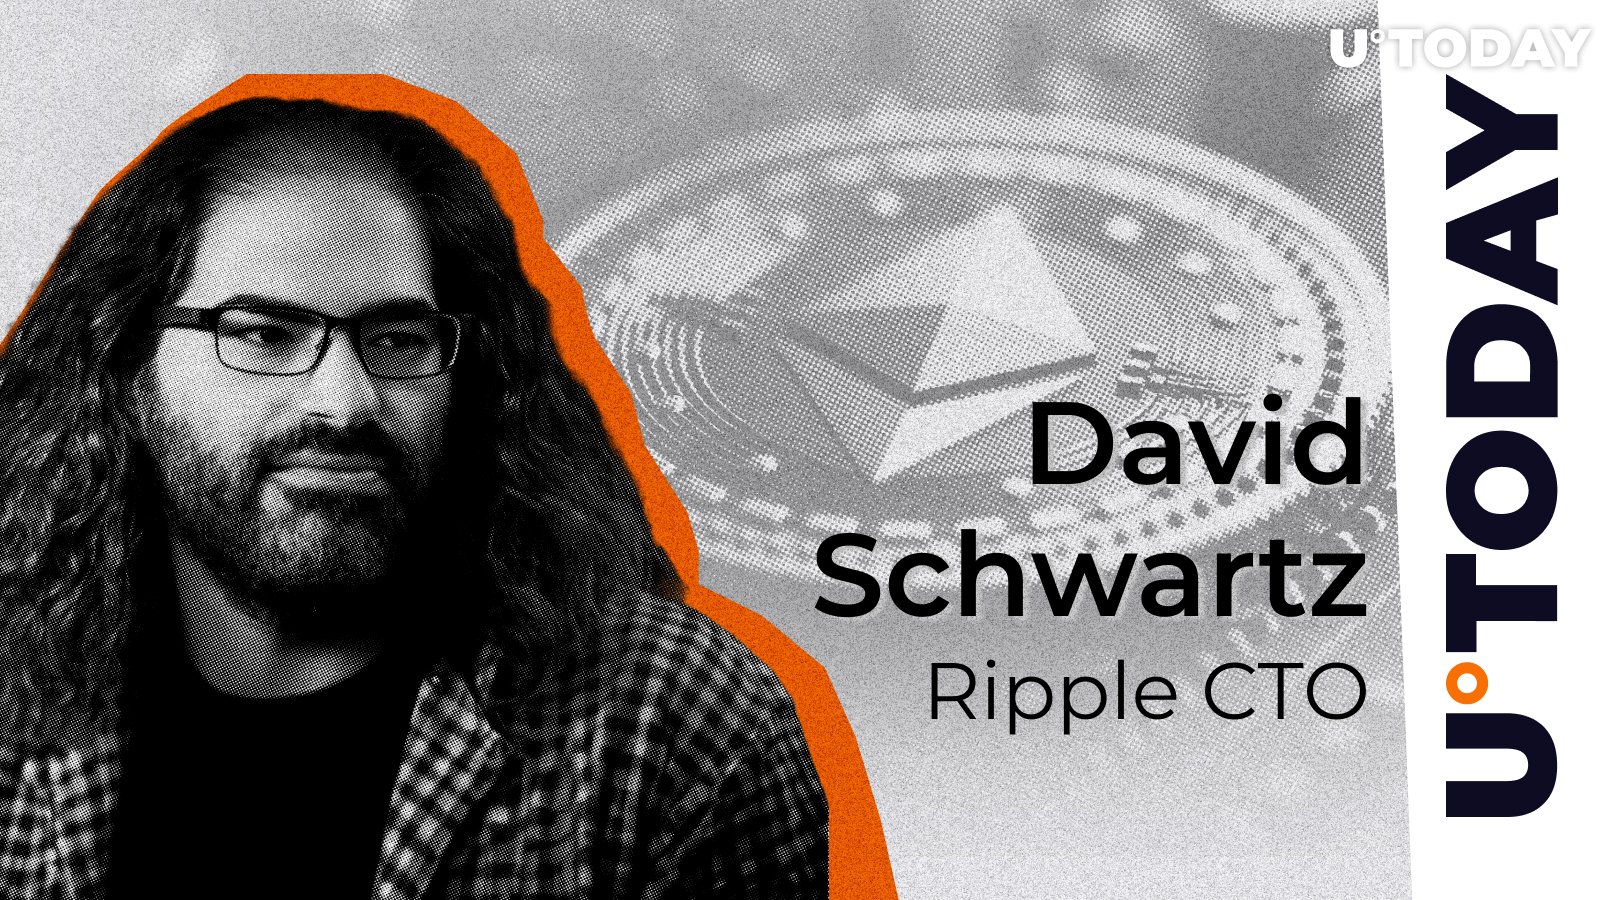 Is Ethereum Security? Ripple CTO Breaks Silence